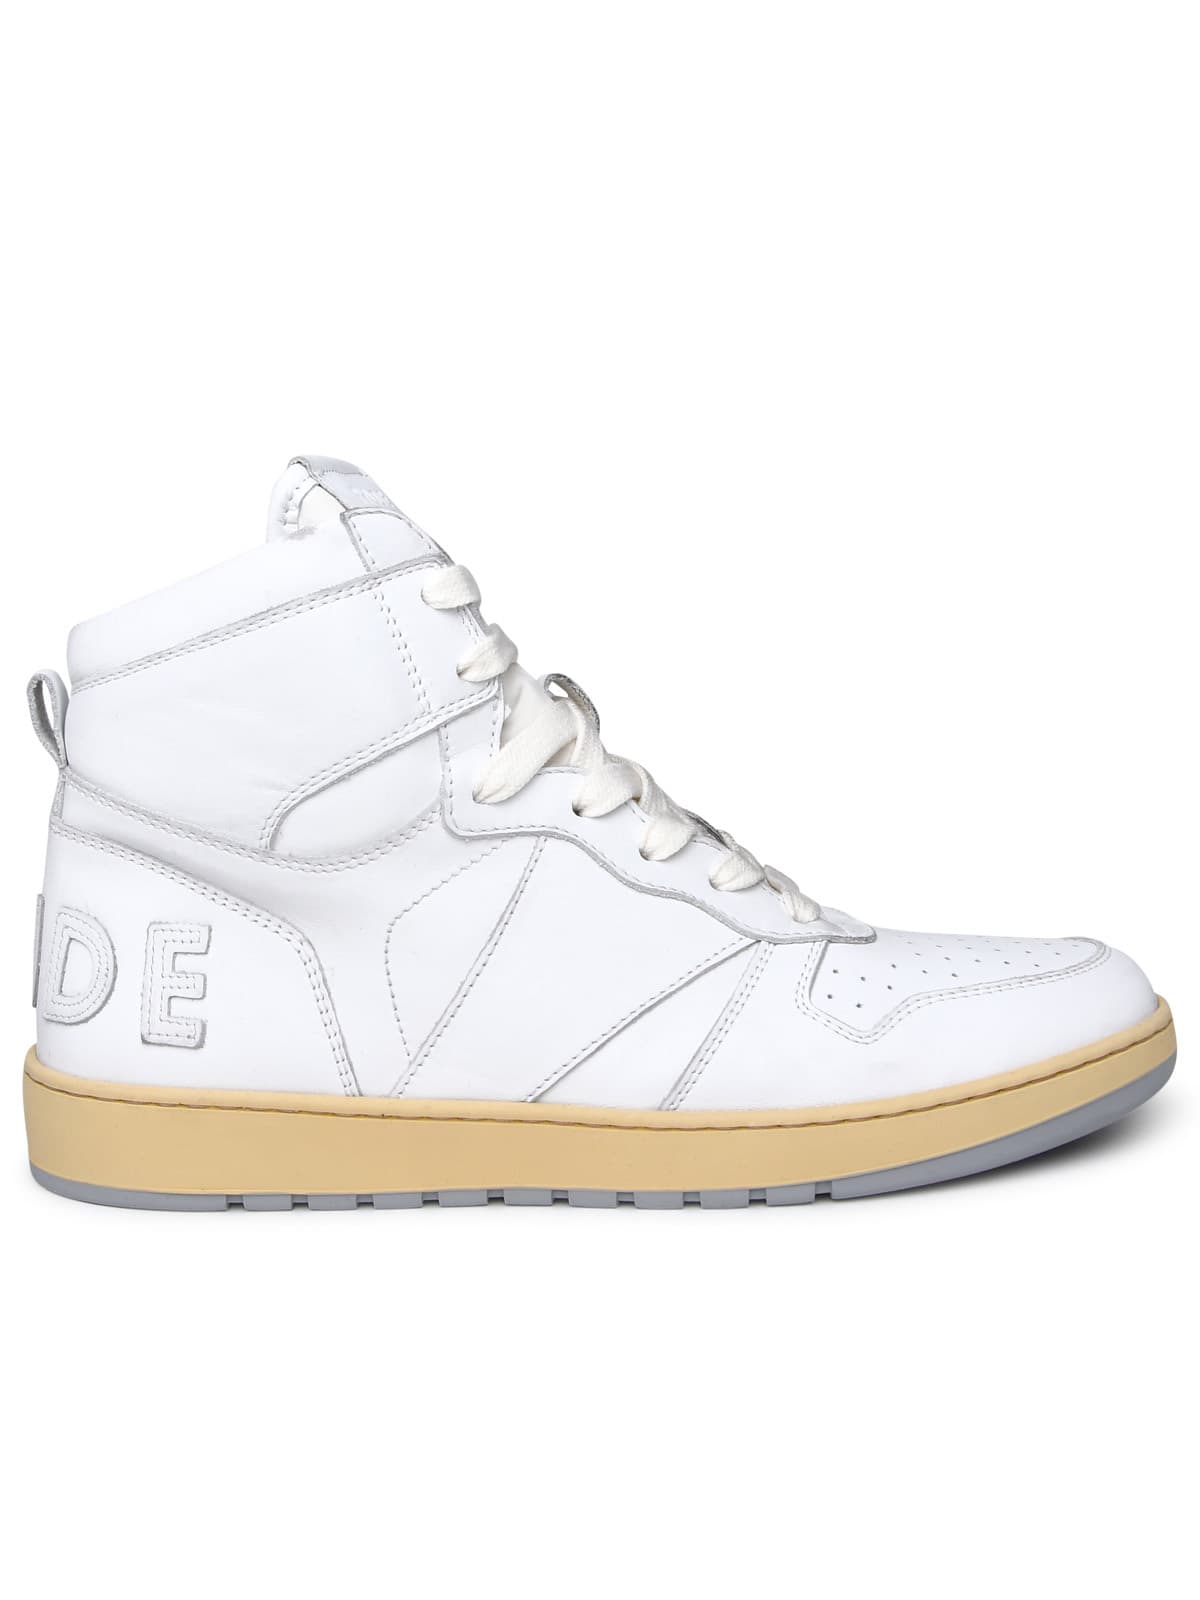 RHUDE RHECHESS SNEAKERS IN WHITE LEATHER